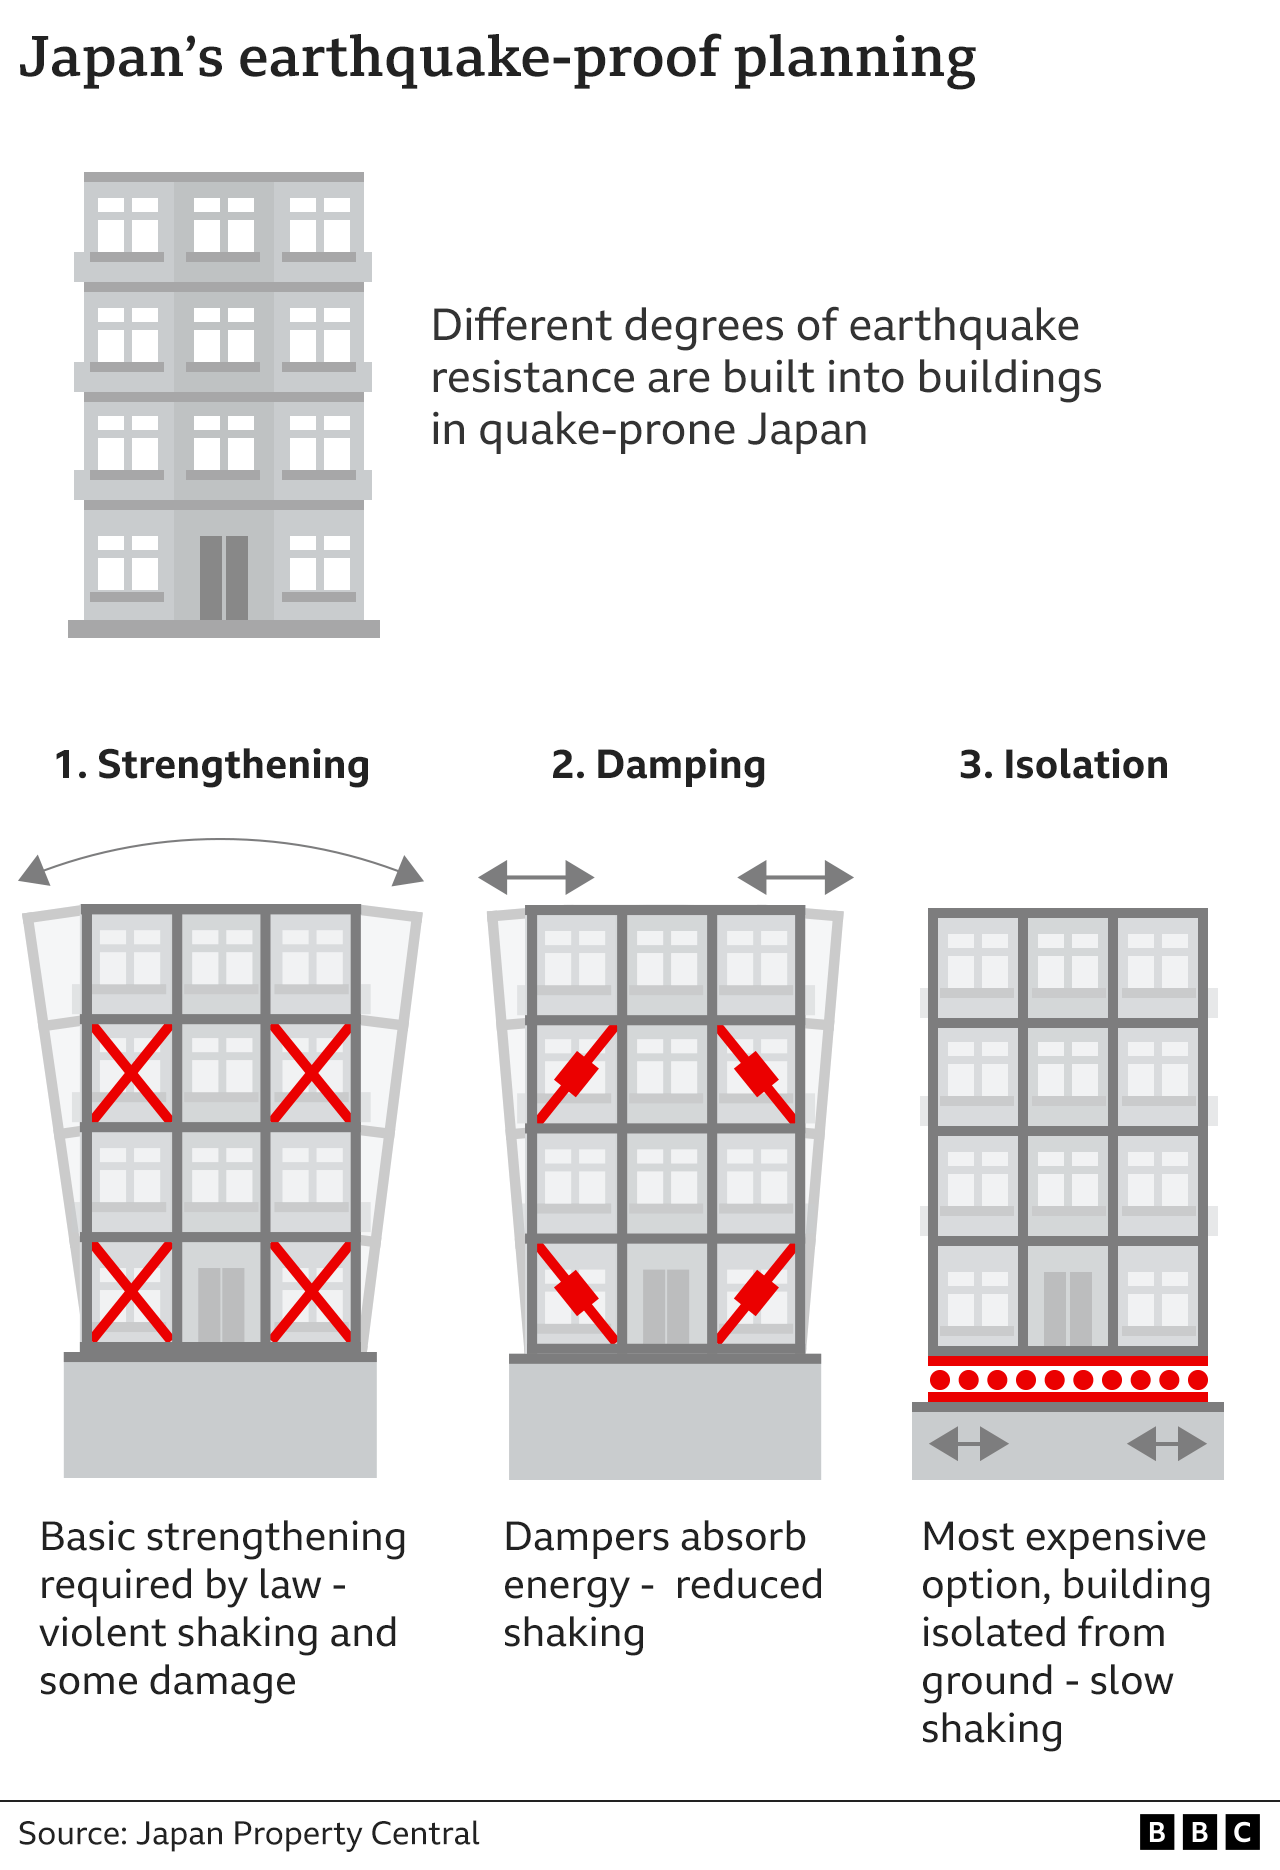 Graphic explaining three different methods of earthquake-proofing buildings in Japan - firstly using materials the strengthen the building, secondly using dampers to absorb the energy and thirdly isolating the building from the ground